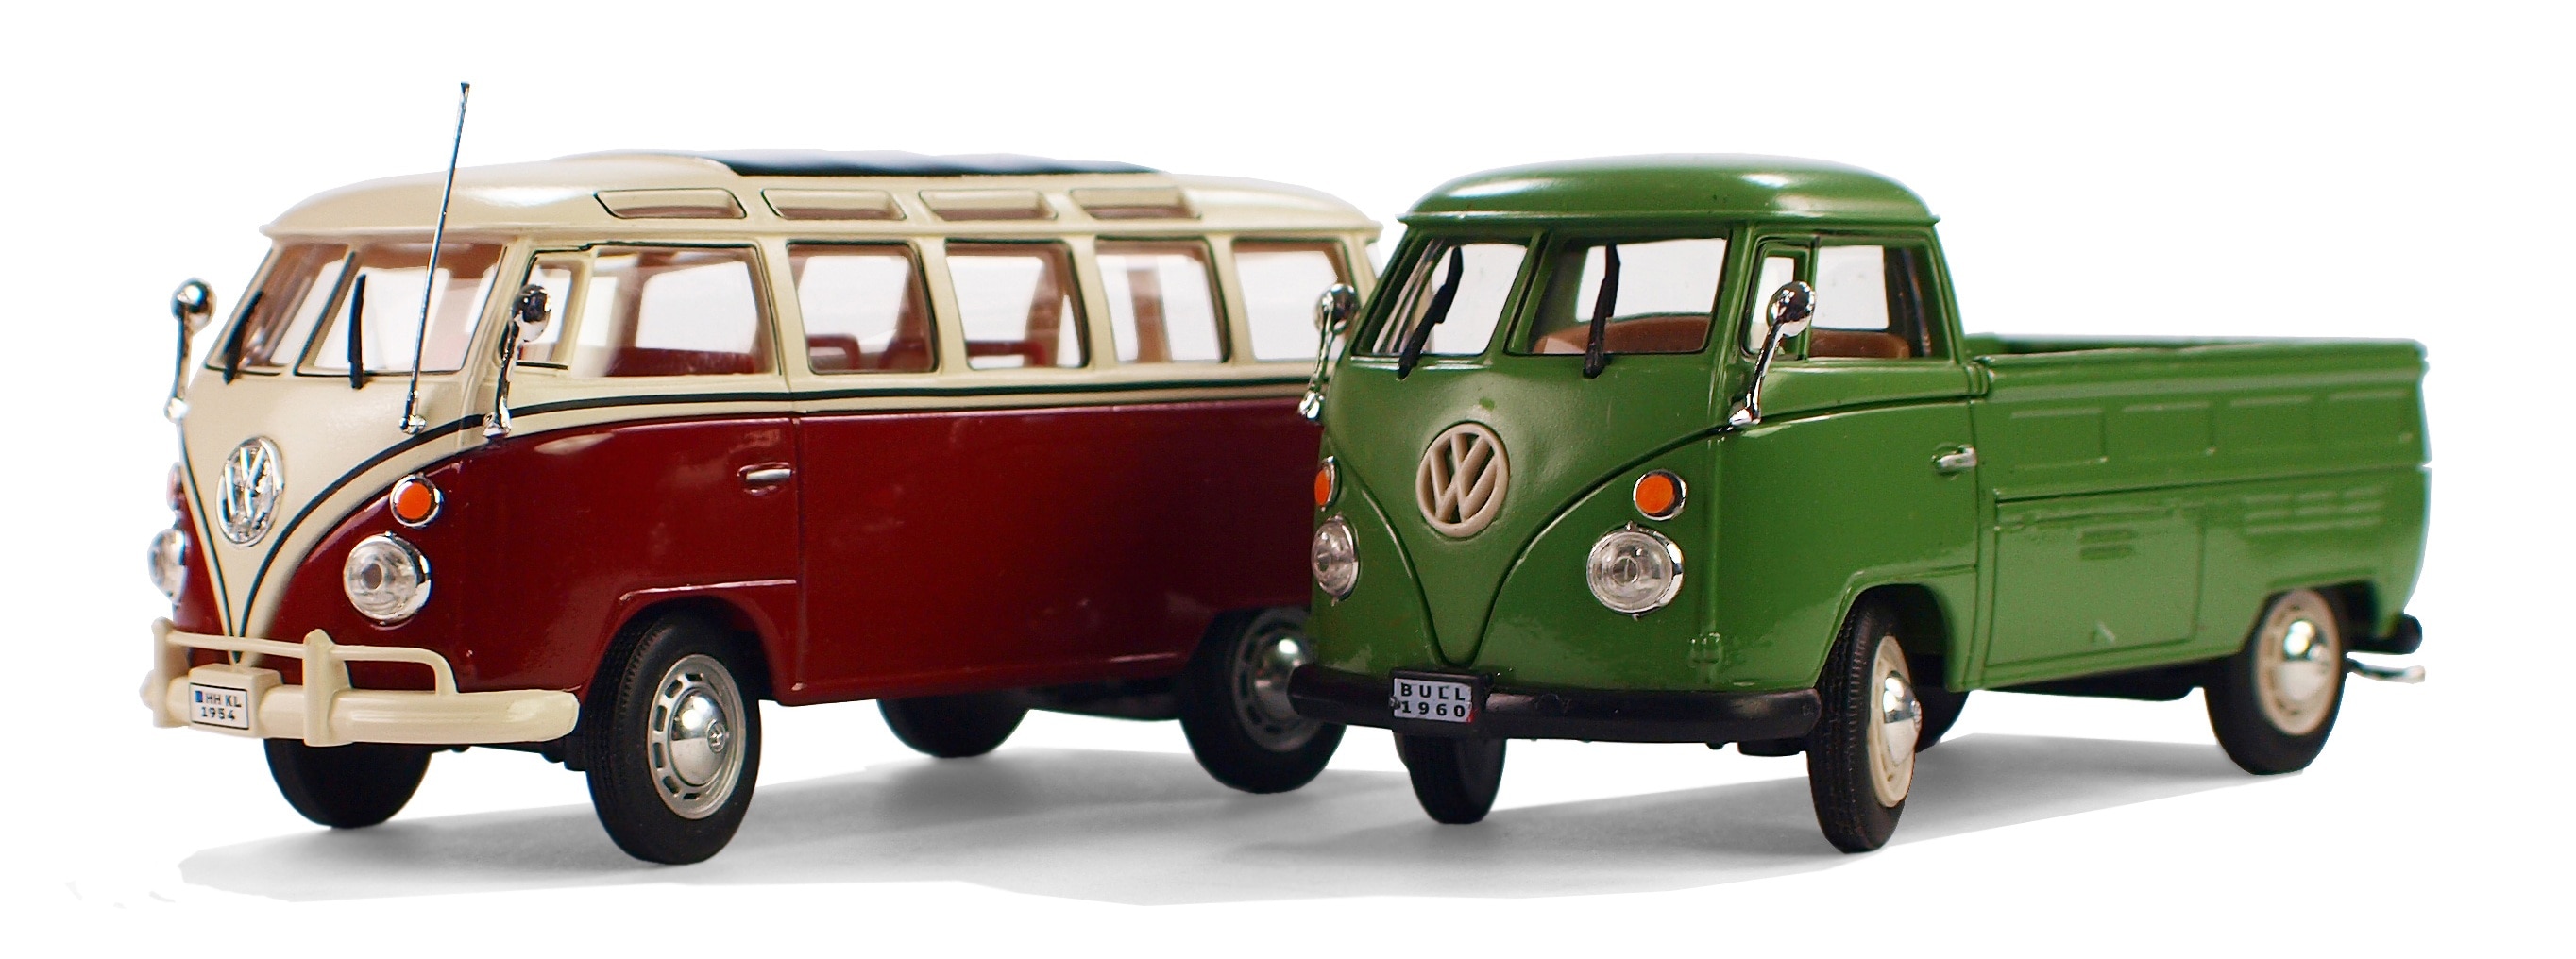 two red, white, and green volkswagen vehicle